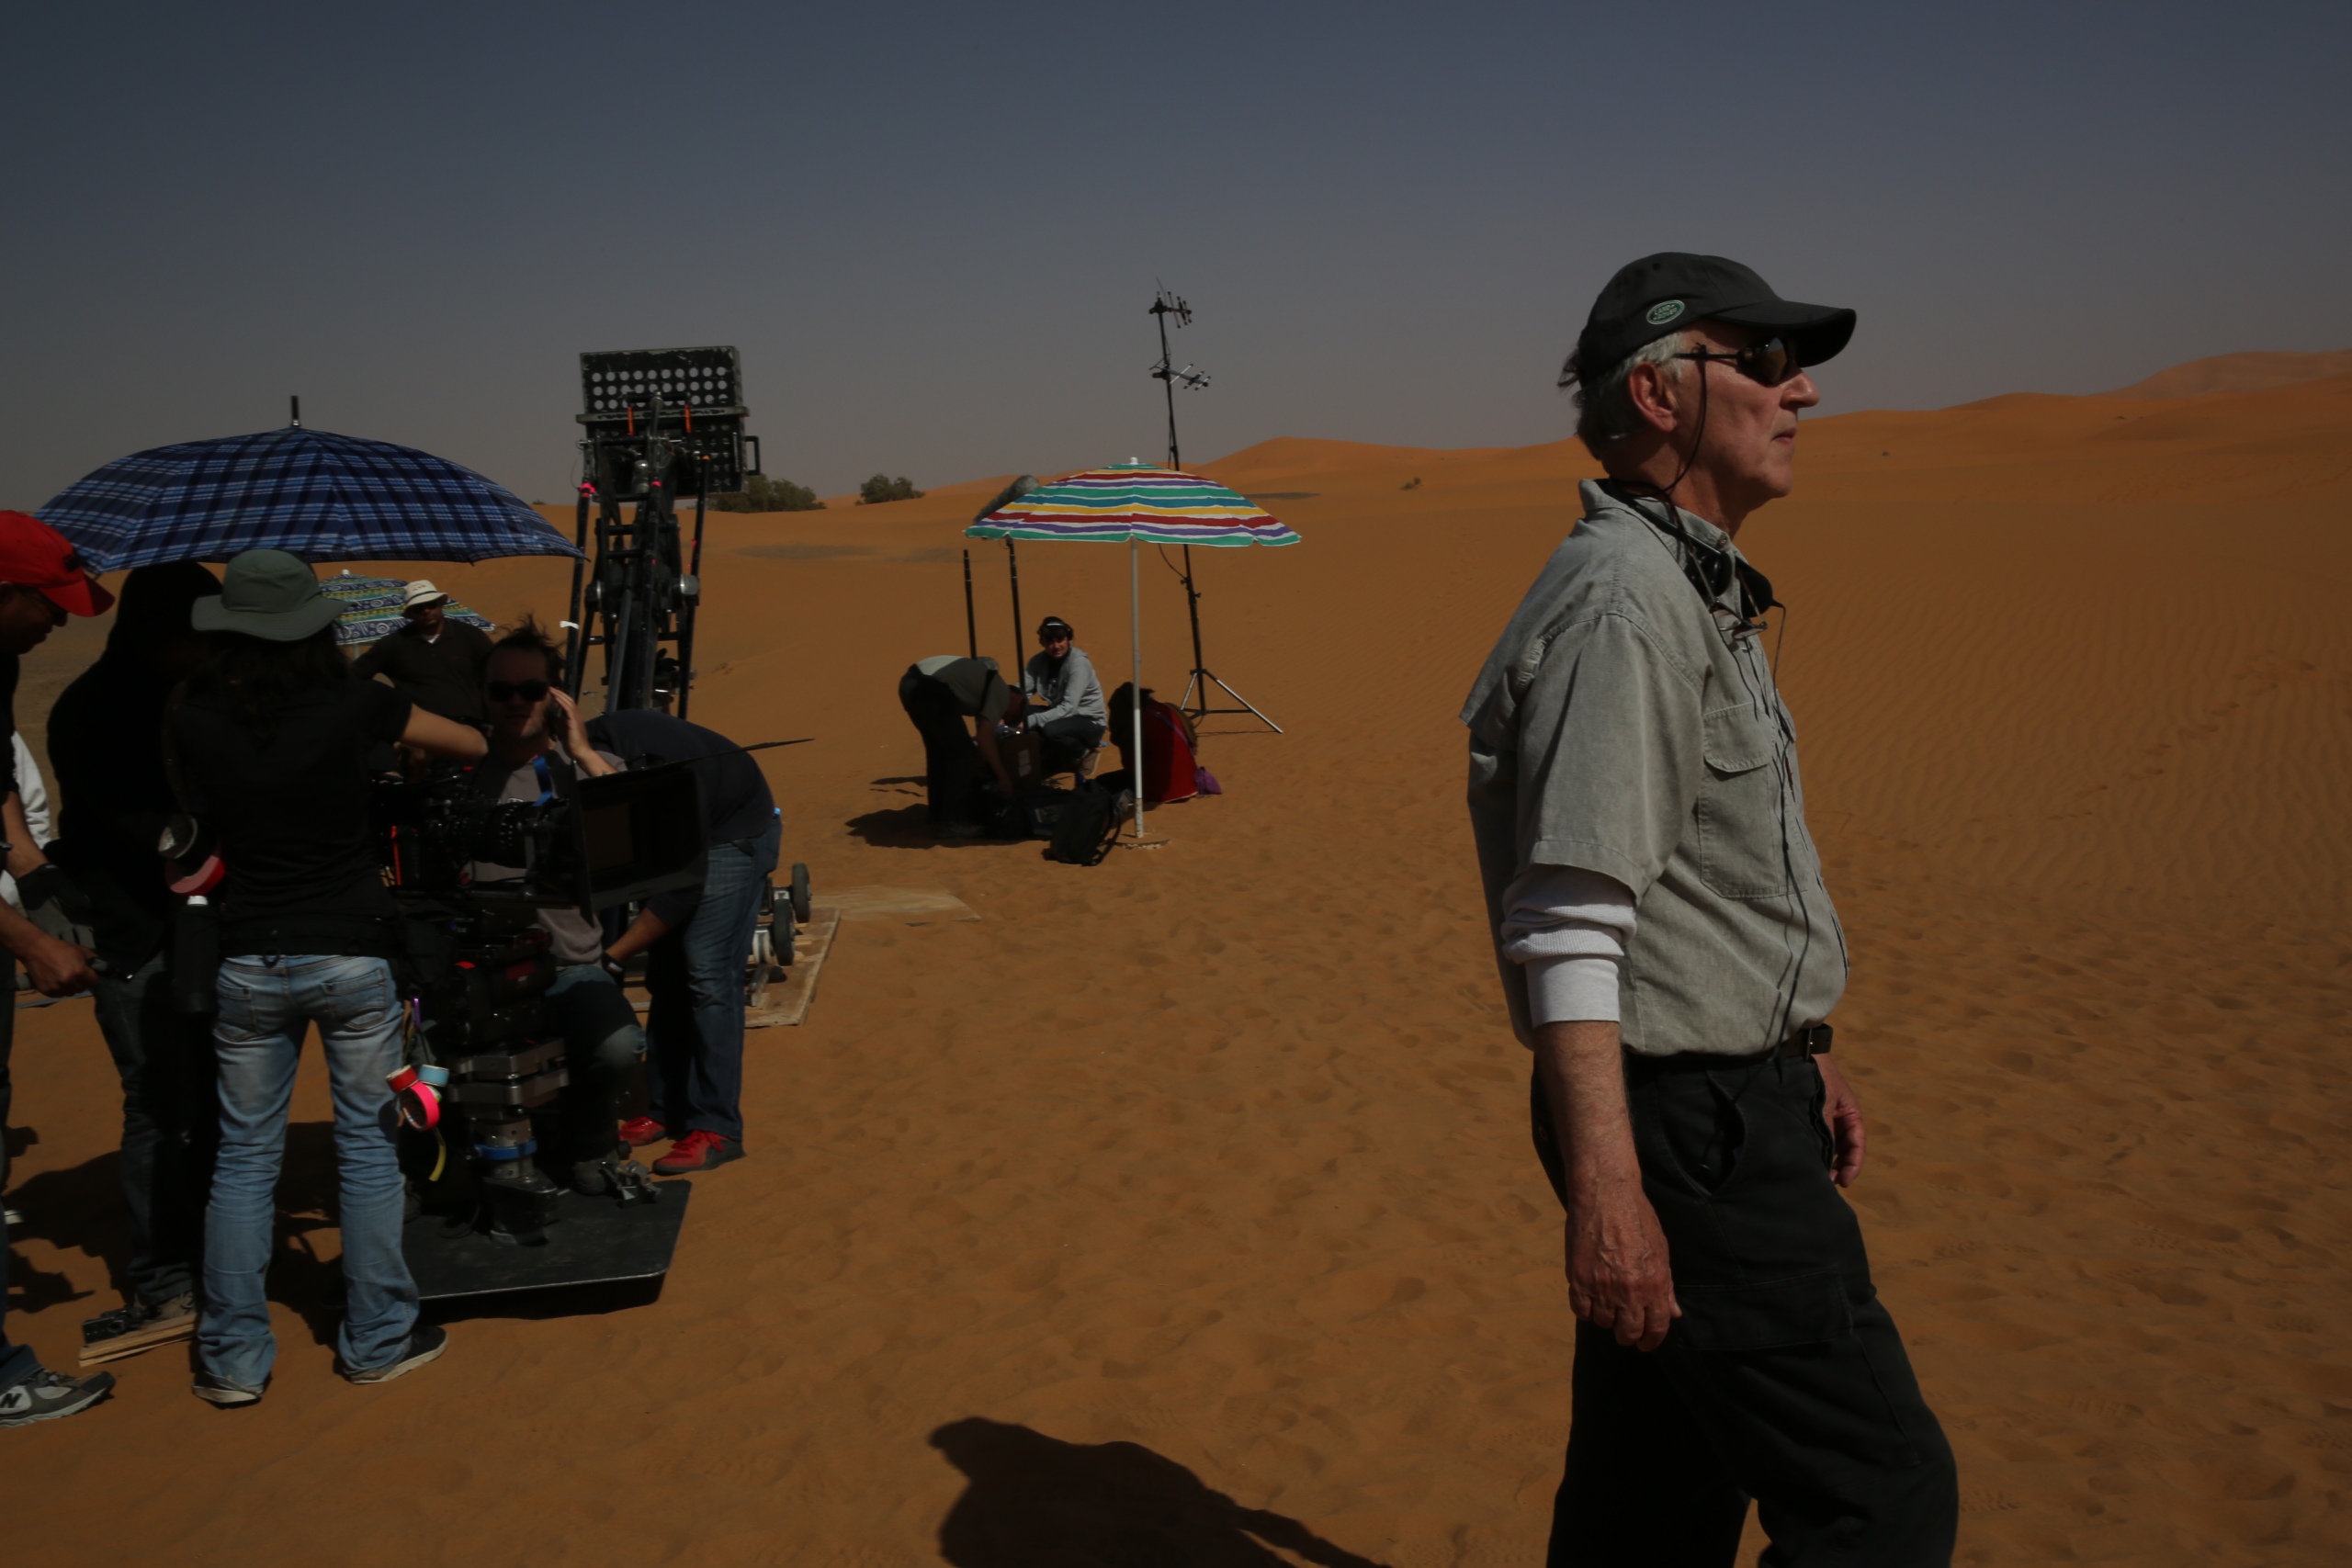 Werner Herzog is standing in the desert, there is a film crew in the background on the right. Herzog is wearing a cap, sunglasses, a light shirt and dark pants. 